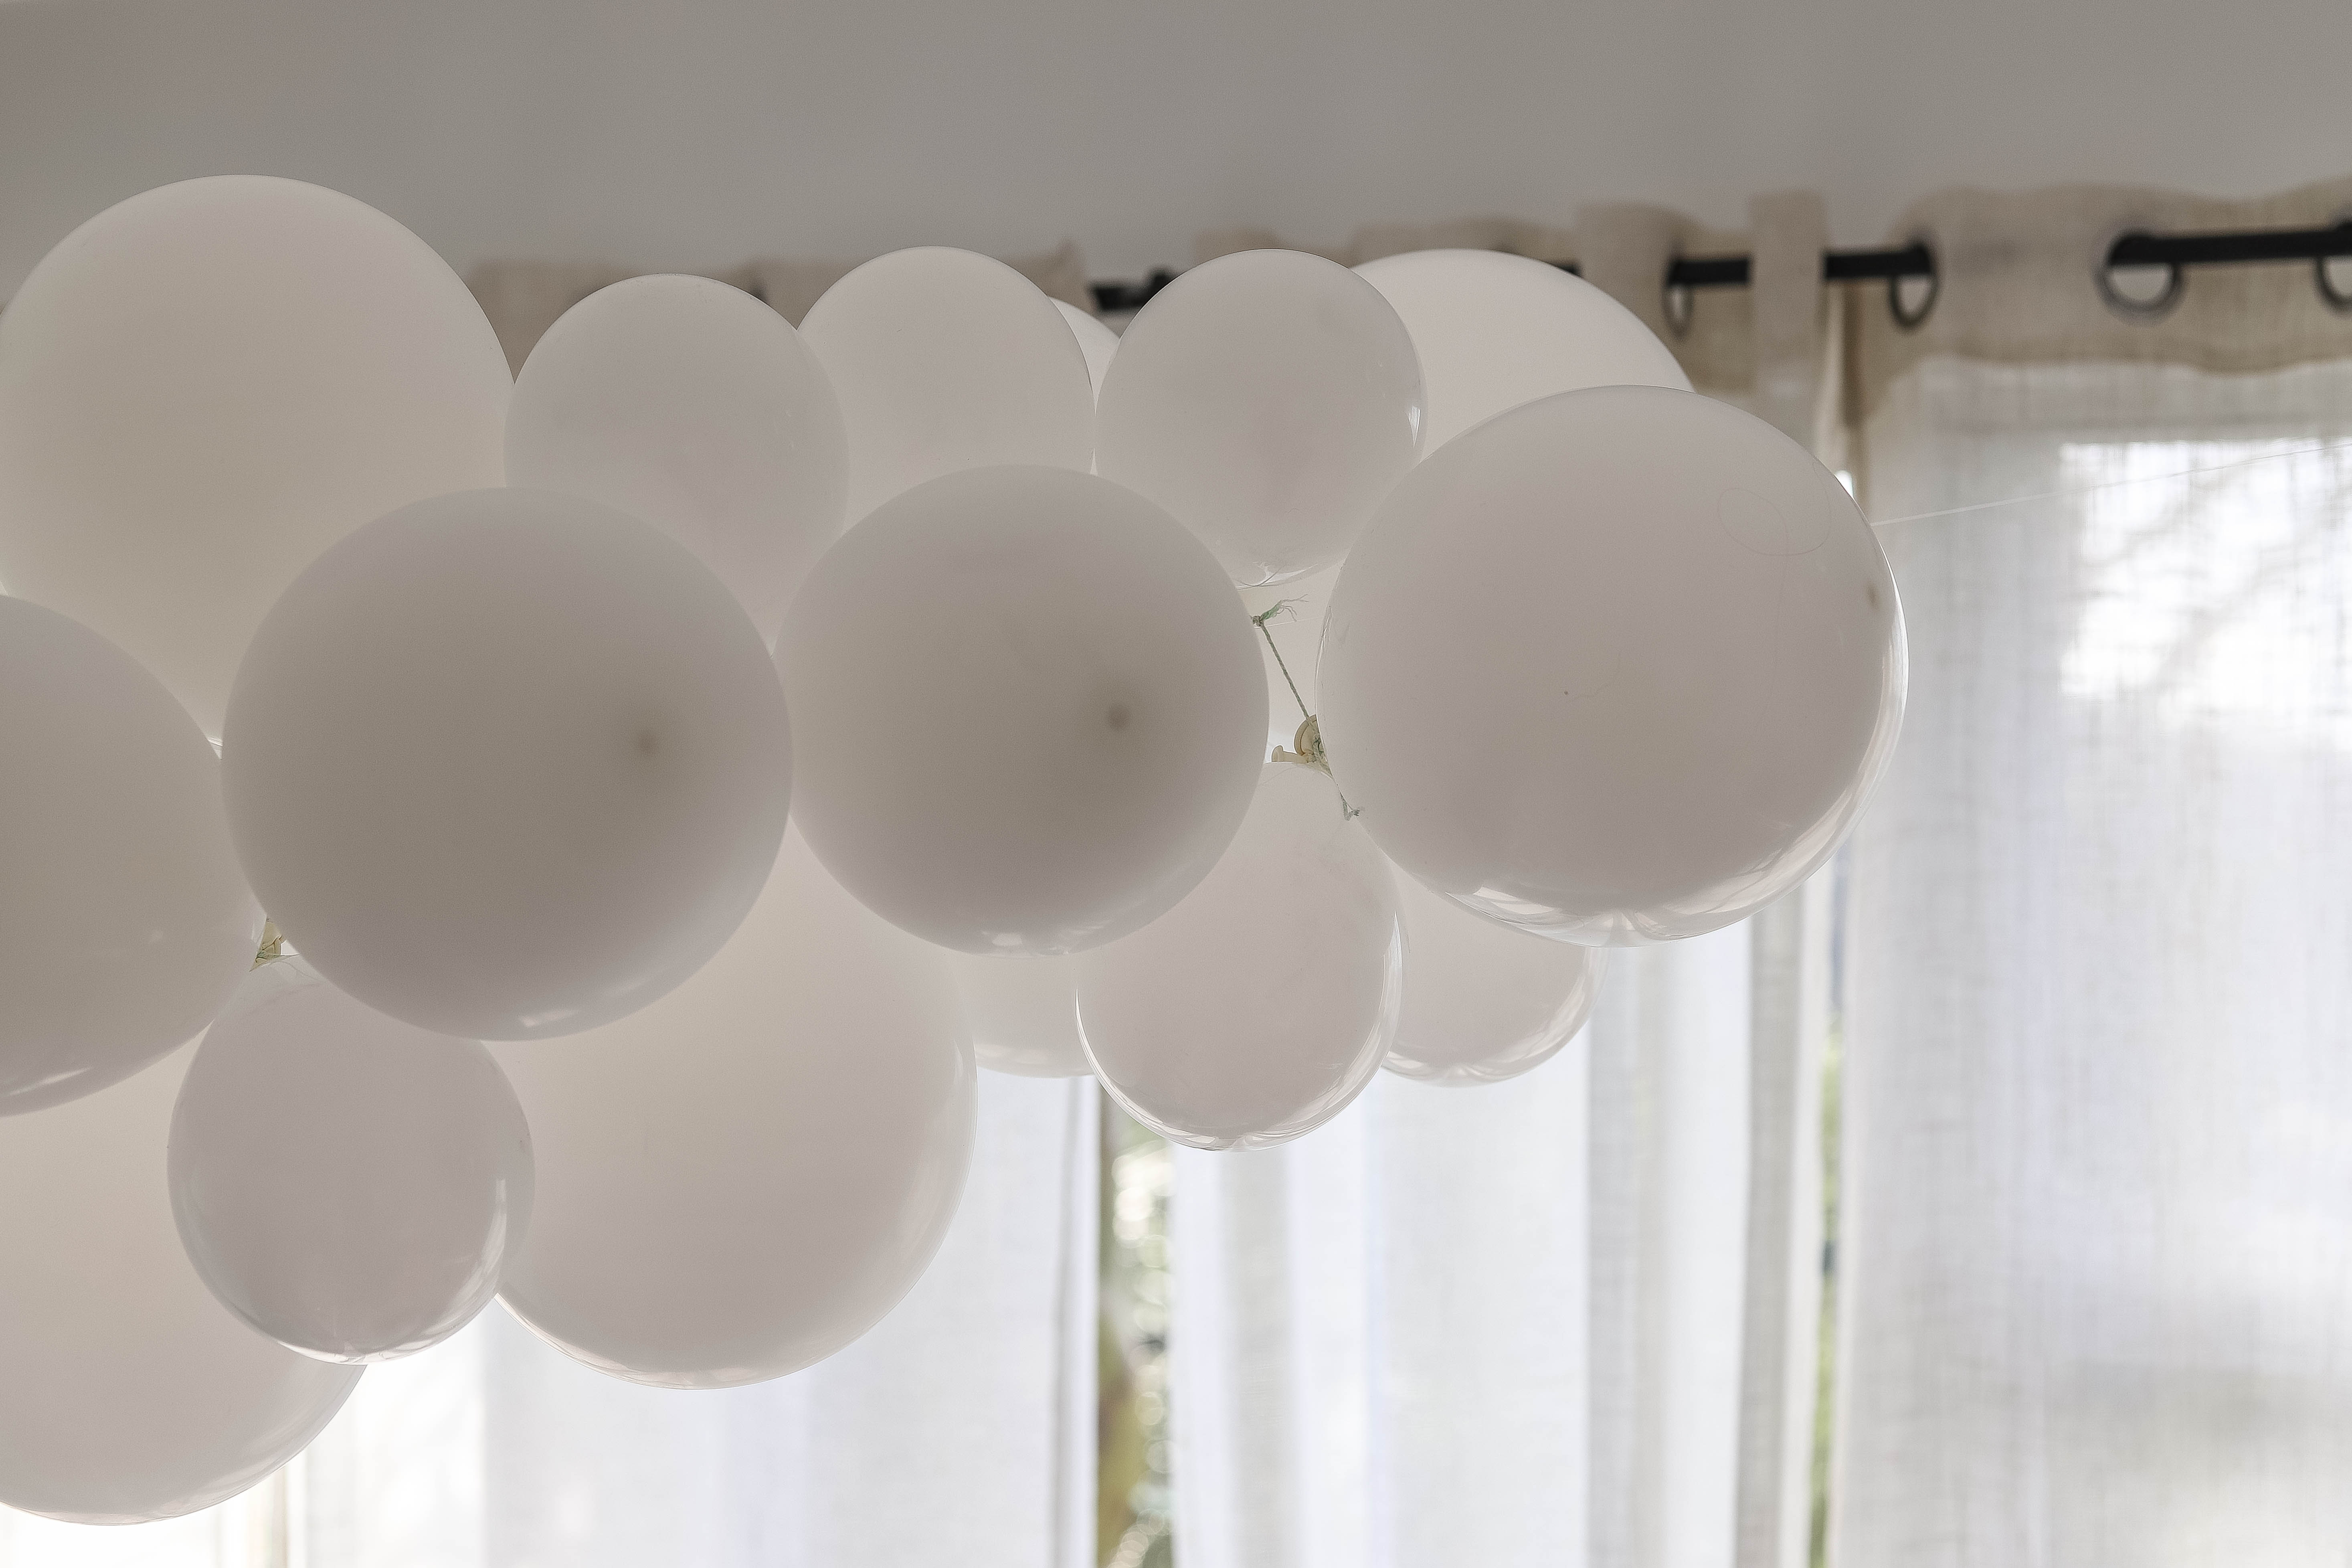 How to make a balloon garland DIY | The Style Aesthetic Blog